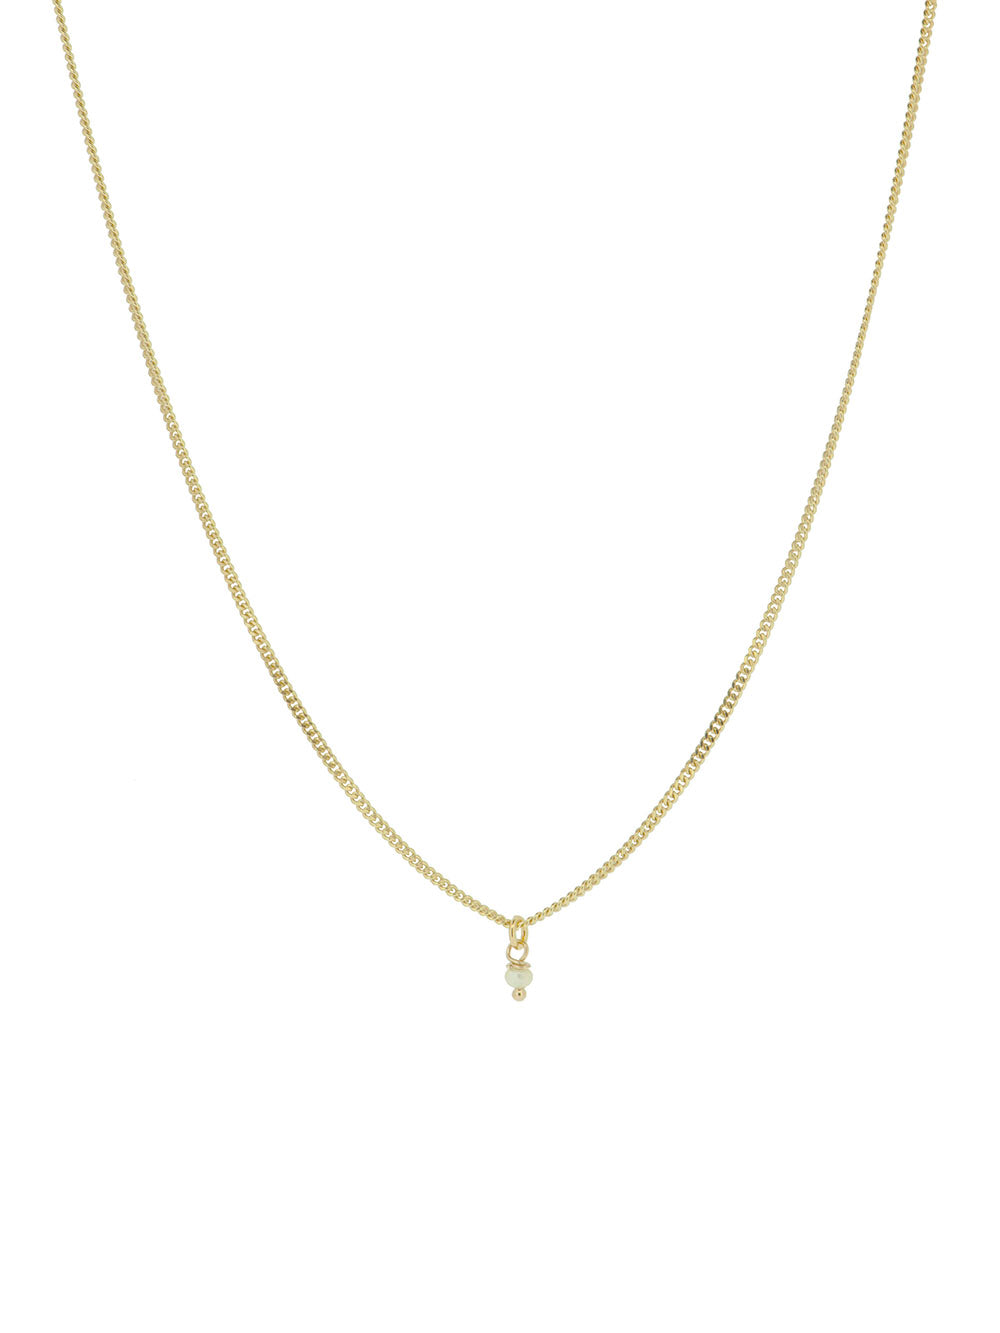 Lily | 14K Solid Gold